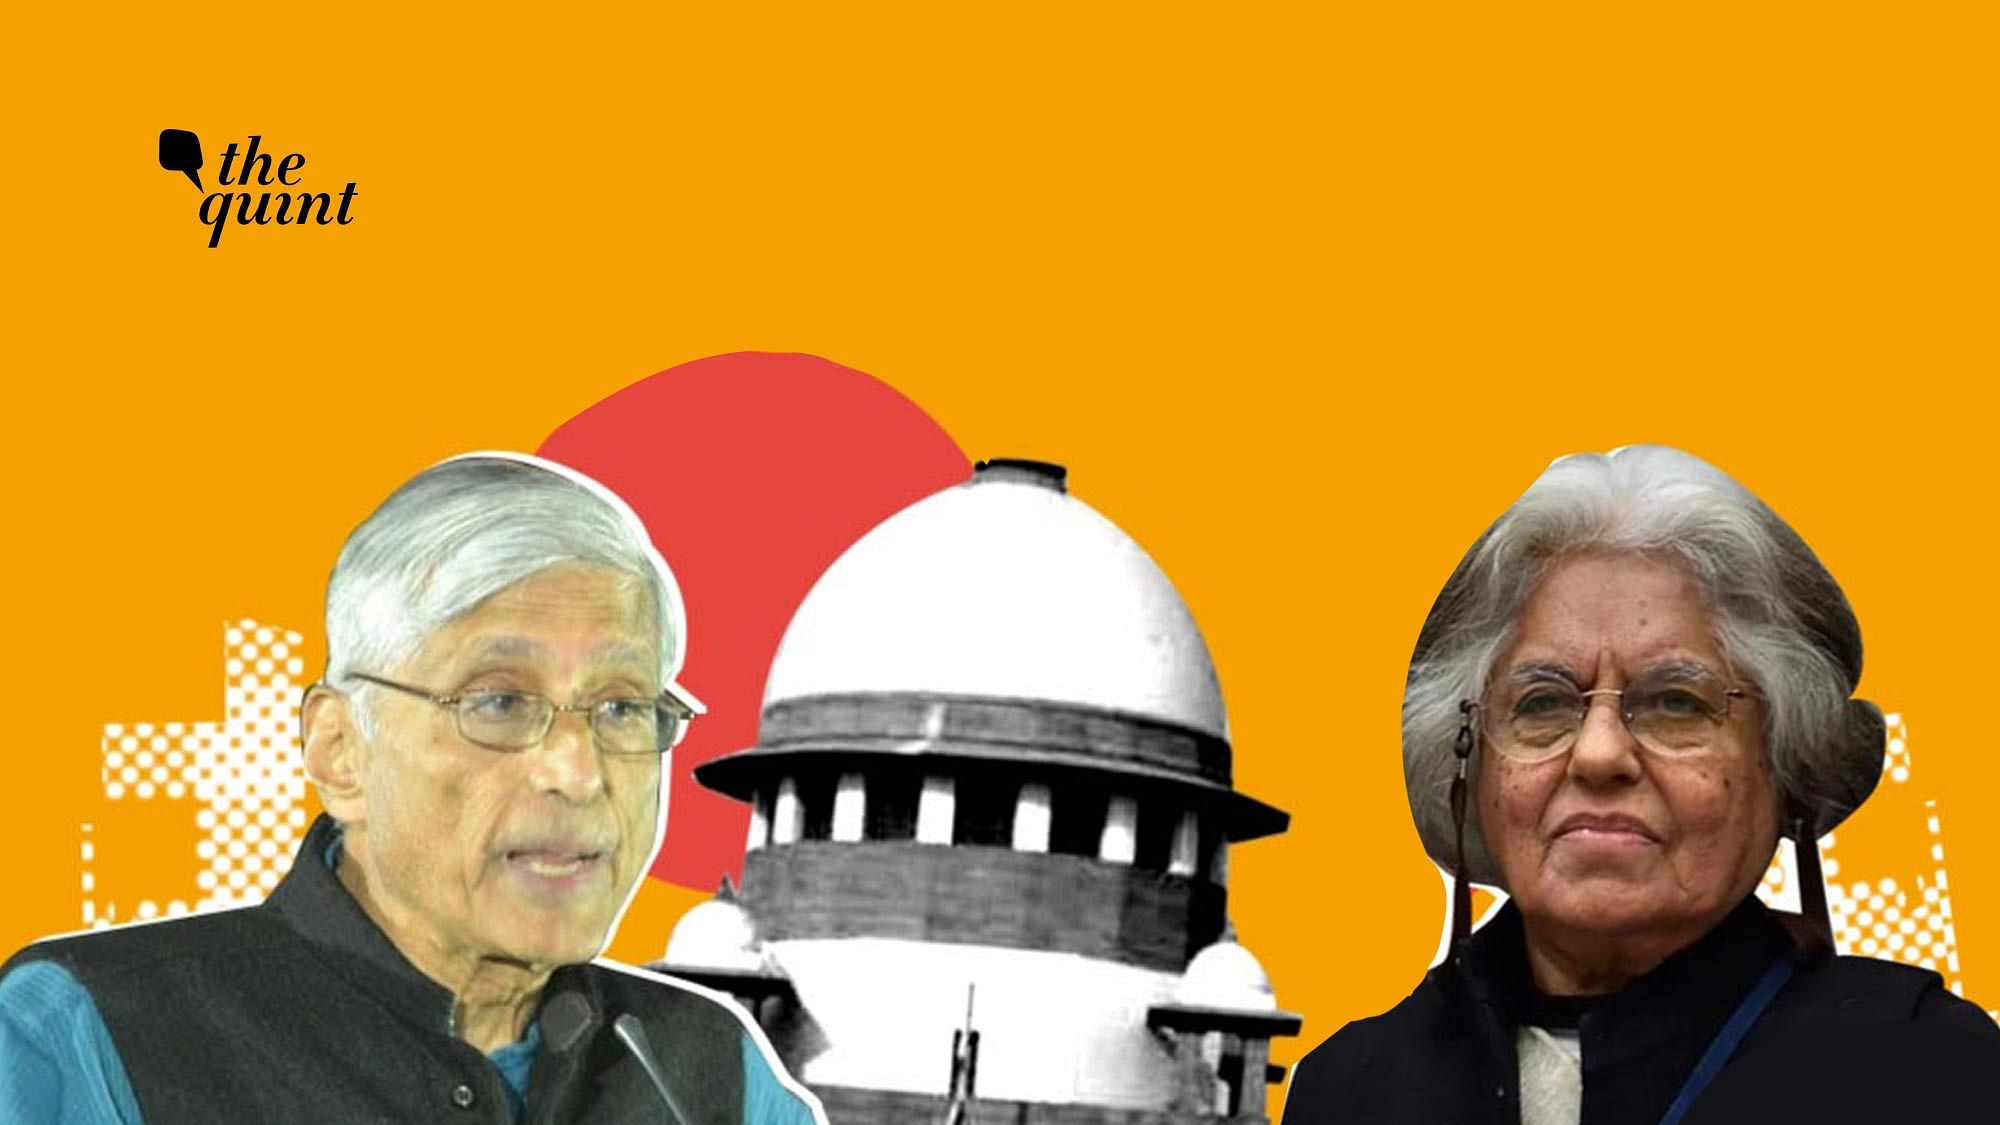 Historian Rajmohan Gandhi and human rights lawyer Indira Jaising were among those who joined a virtual forum organised by the Indian-American community in solidarity with Prashant Bhushan.